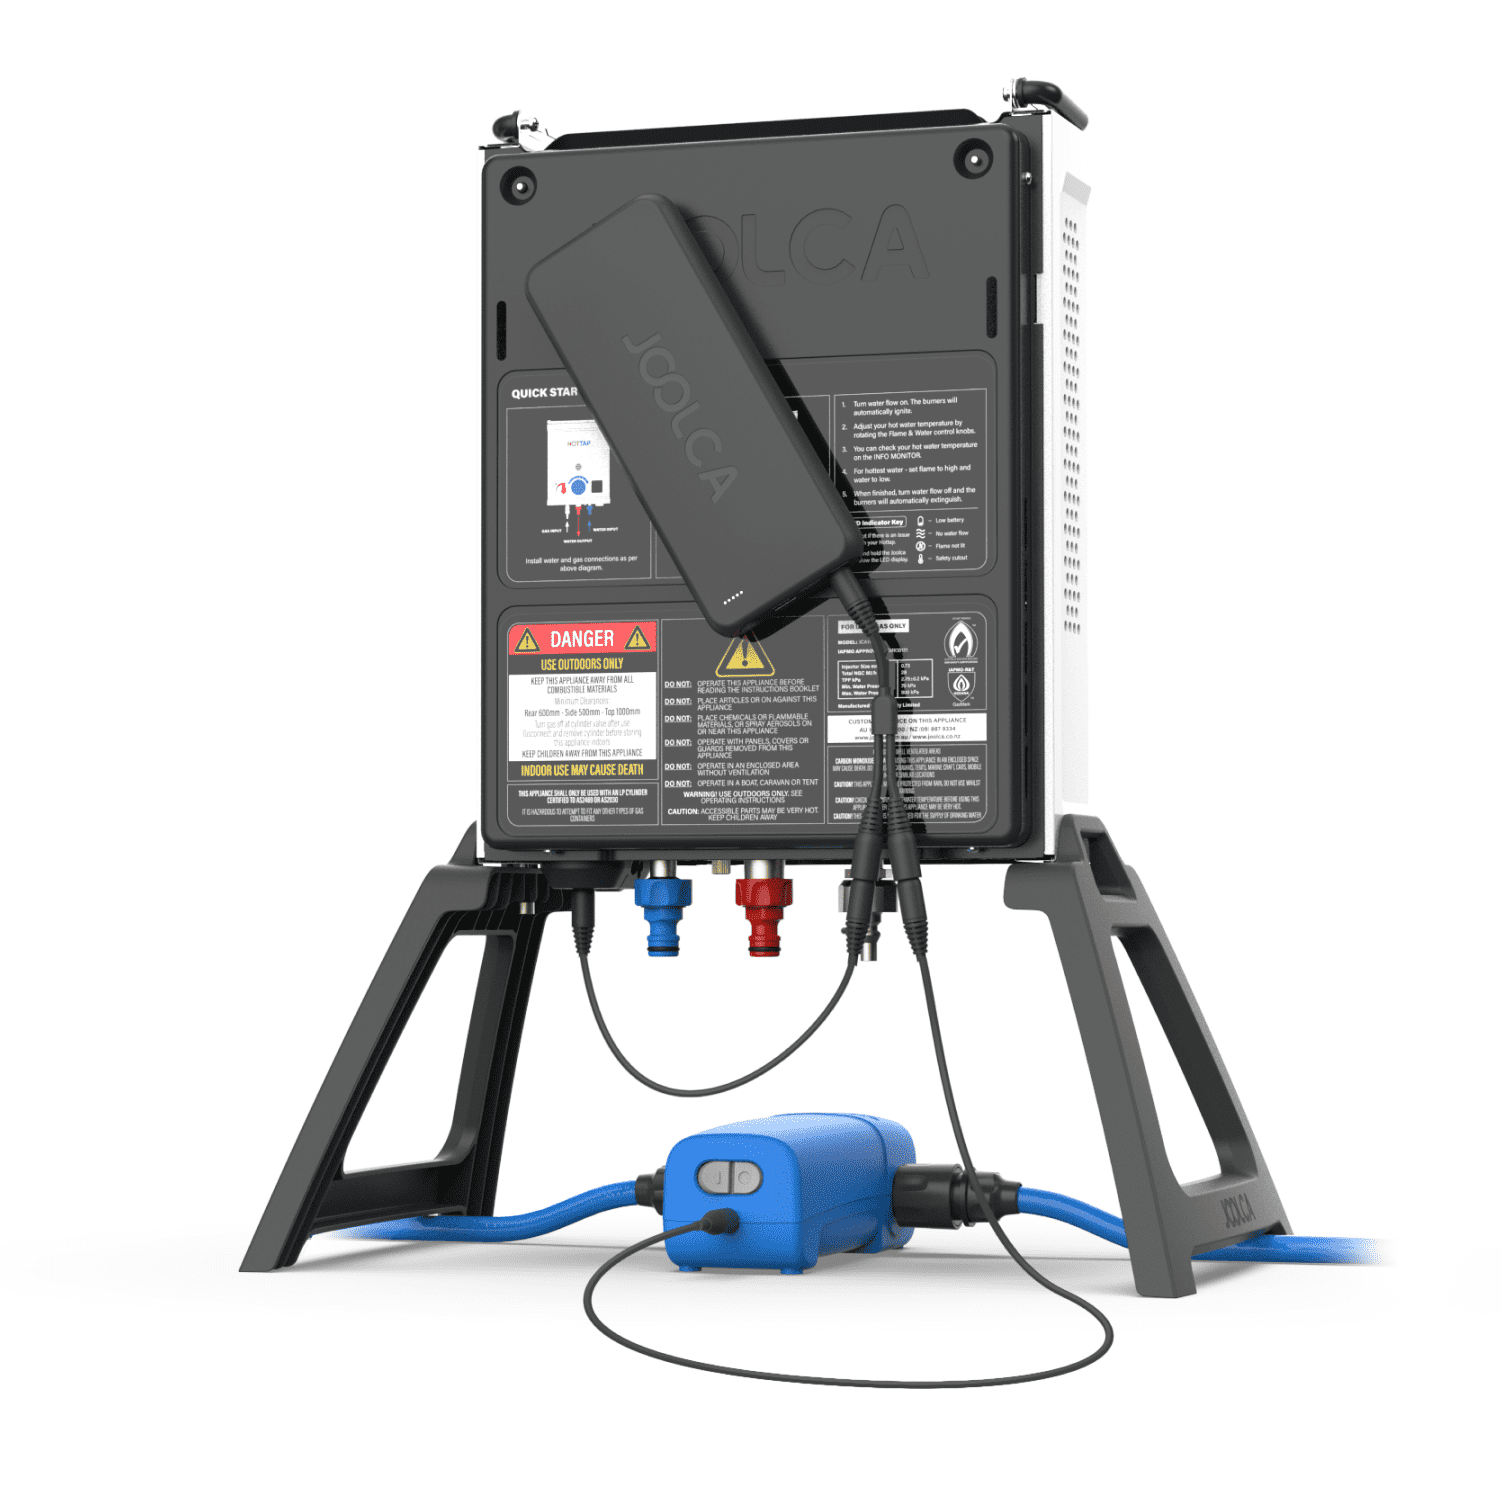 The back view of a portable hot water heater with a portable power bank